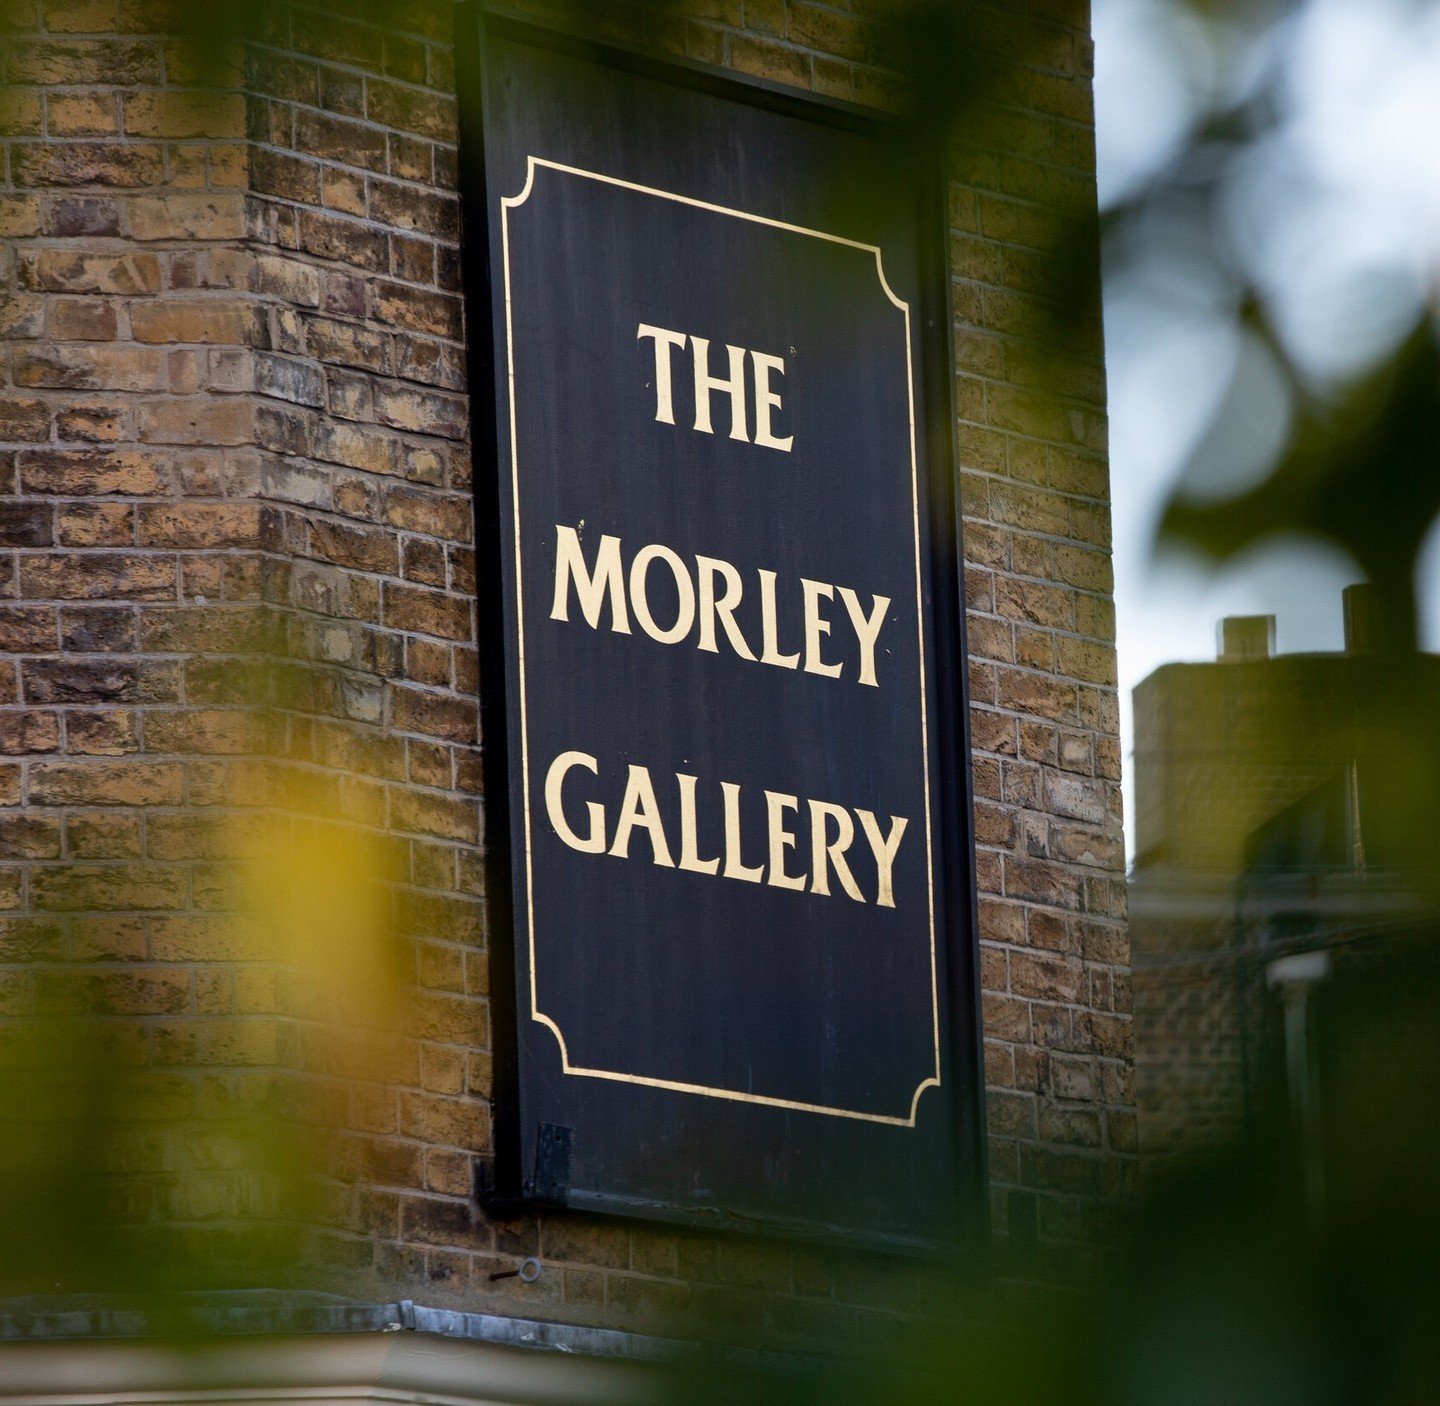 Due to unforeseen circumstances, the Morley Gallery (currently hosting MADE) will be closed today, Wednesday 1 May. We aim to reopen as normal tomorrow. Thank you for your patience.